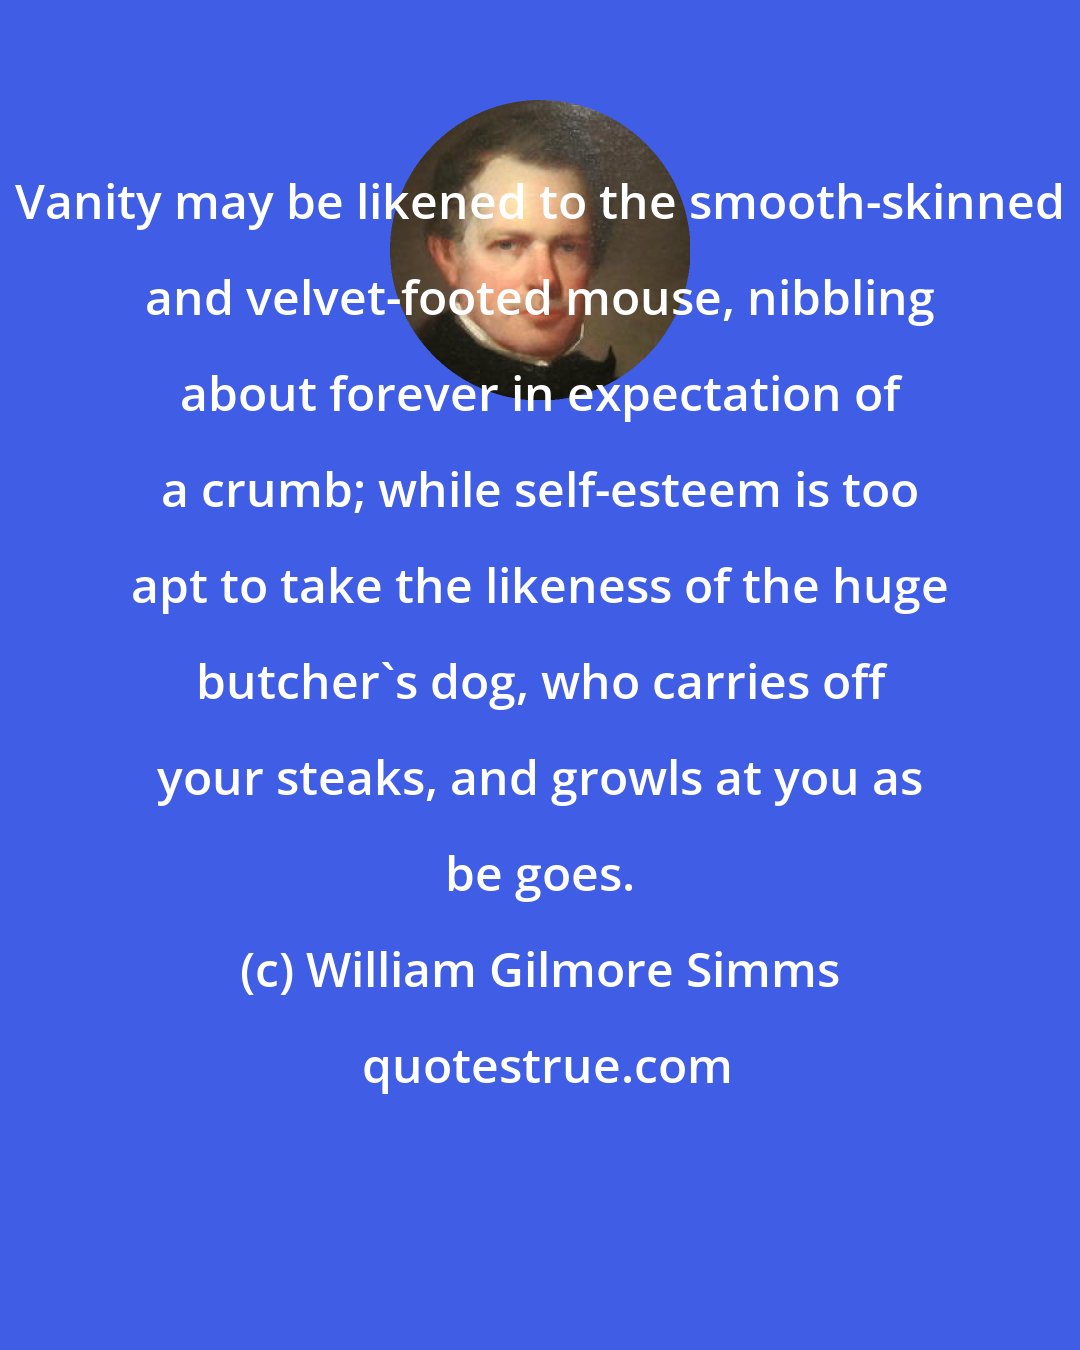 William Gilmore Simms: Vanity may be likened to the smooth-skinned and velvet-footed mouse, nibbling about forever in expectation of a crumb; while self-esteem is too apt to take the likeness of the huge butcher's dog, who carries off your steaks, and growls at you as be goes.